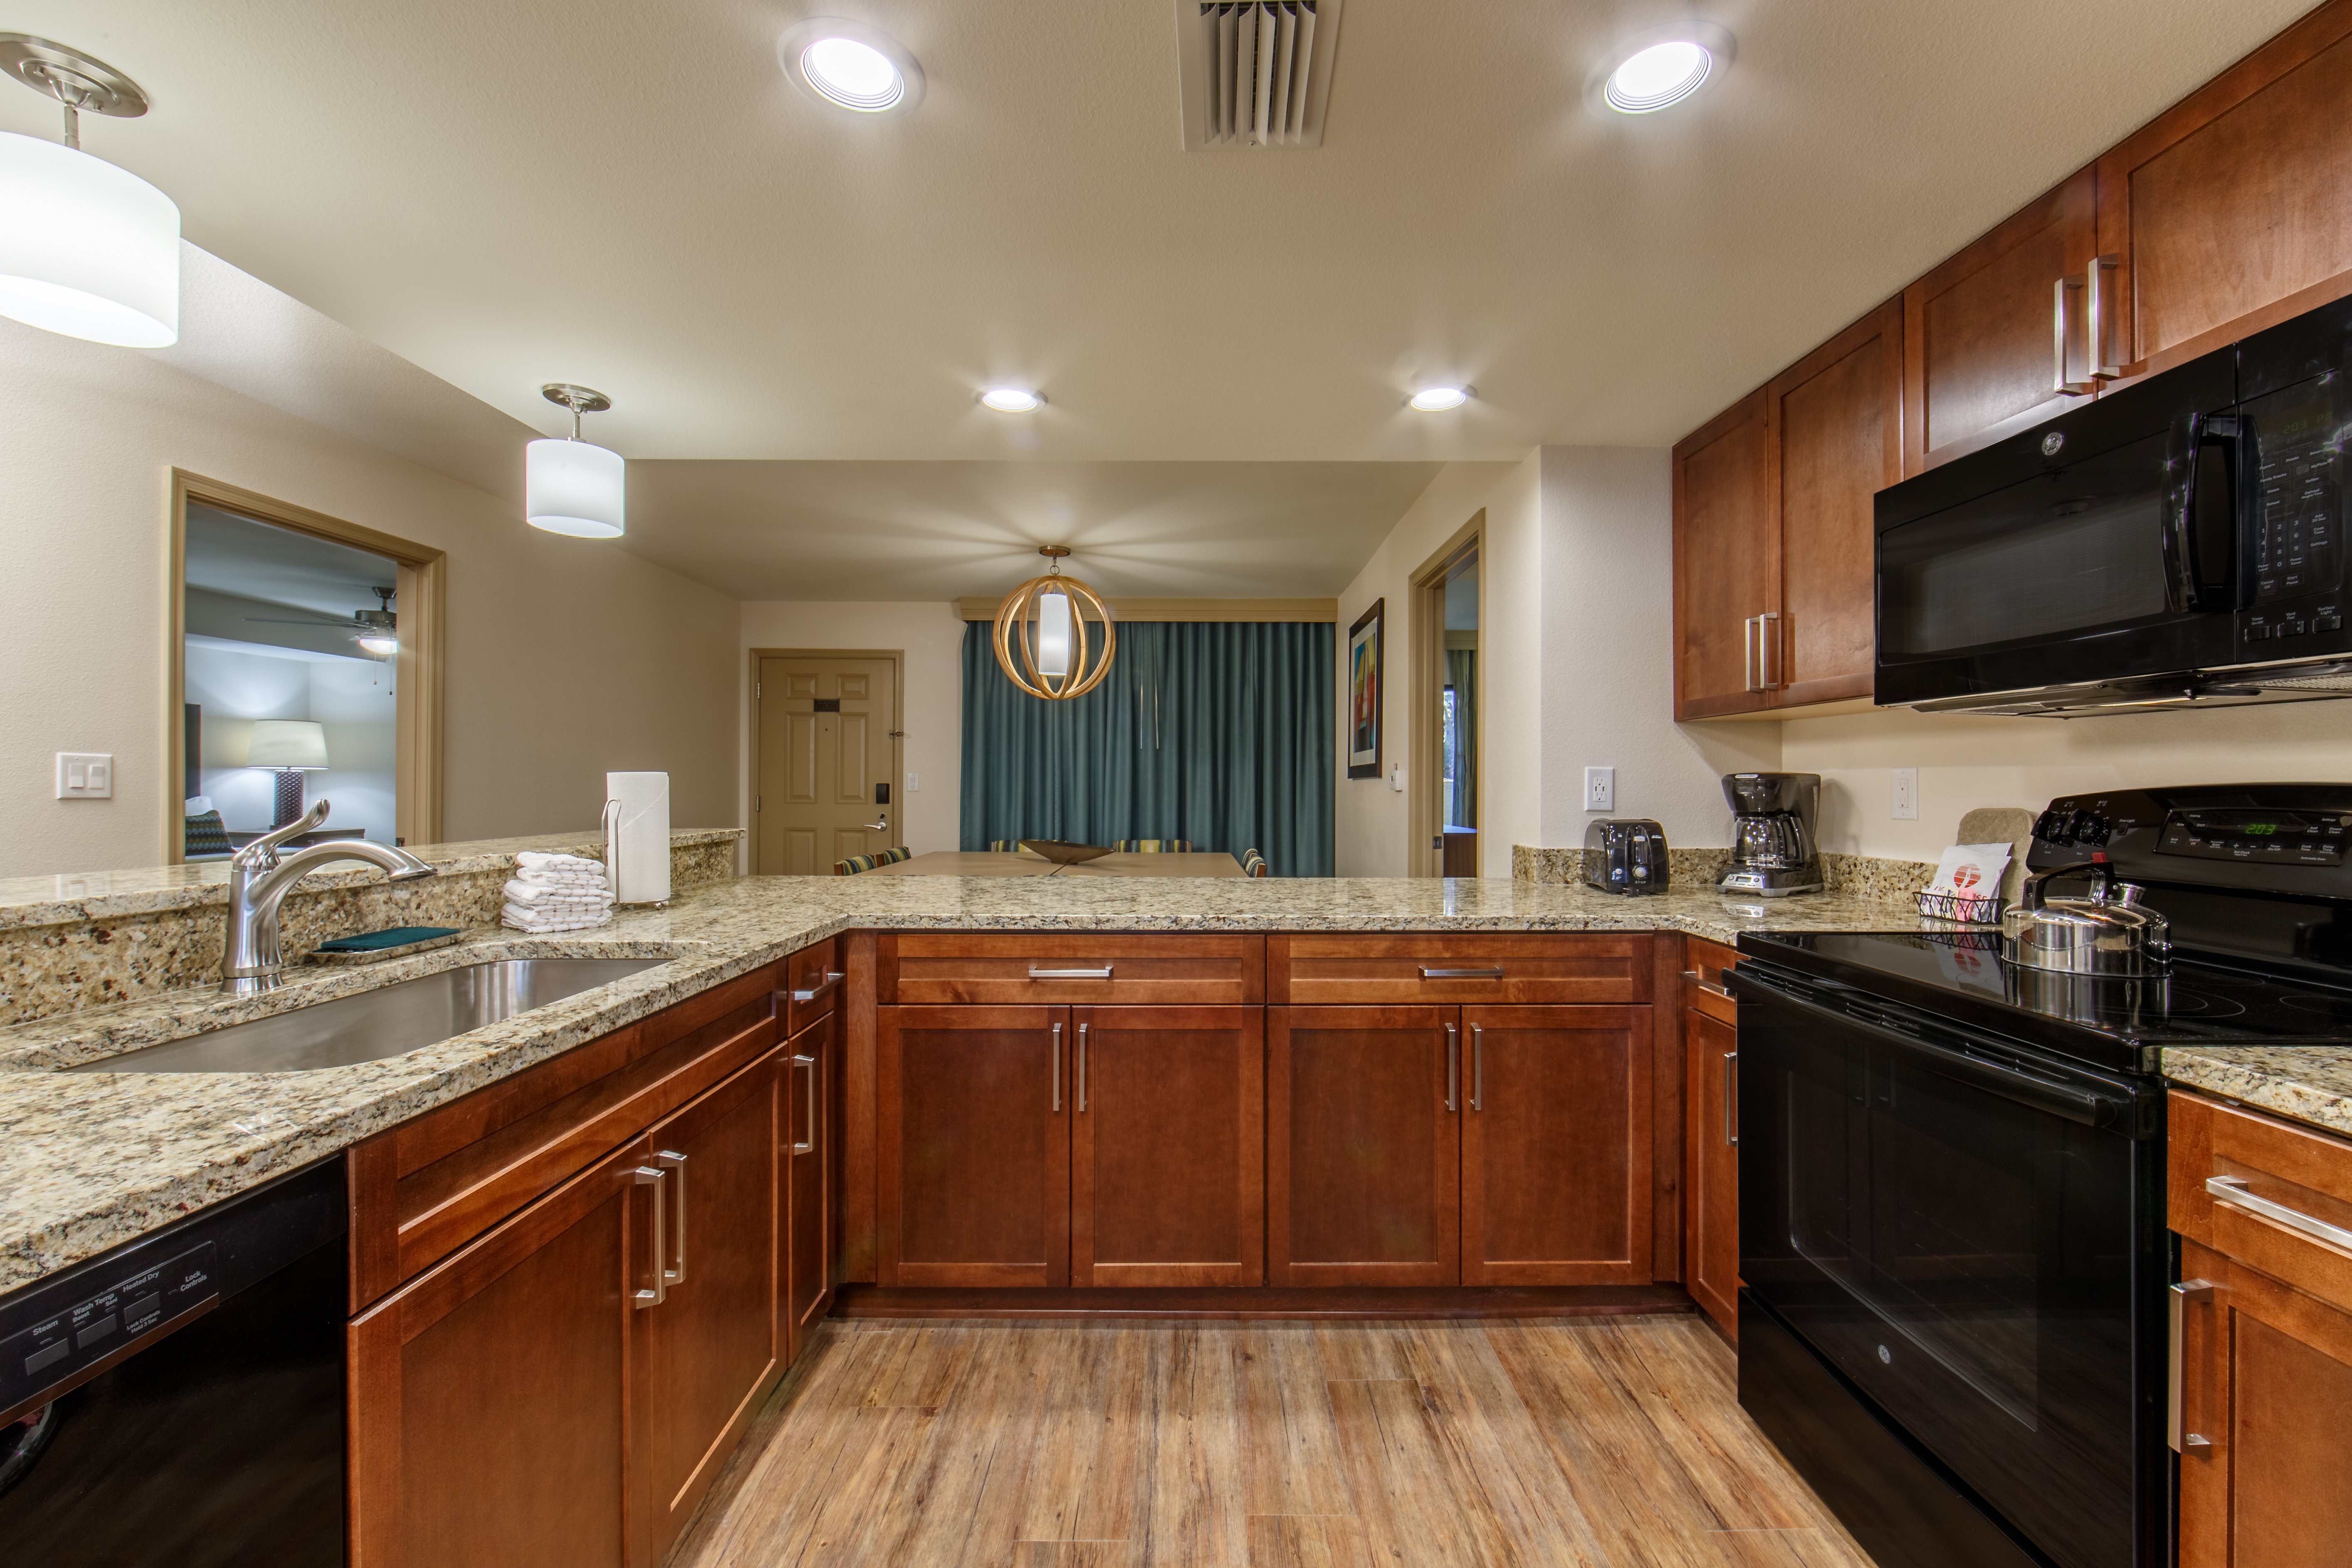 Prepare meals in a spacious and fully-equipped kitchen